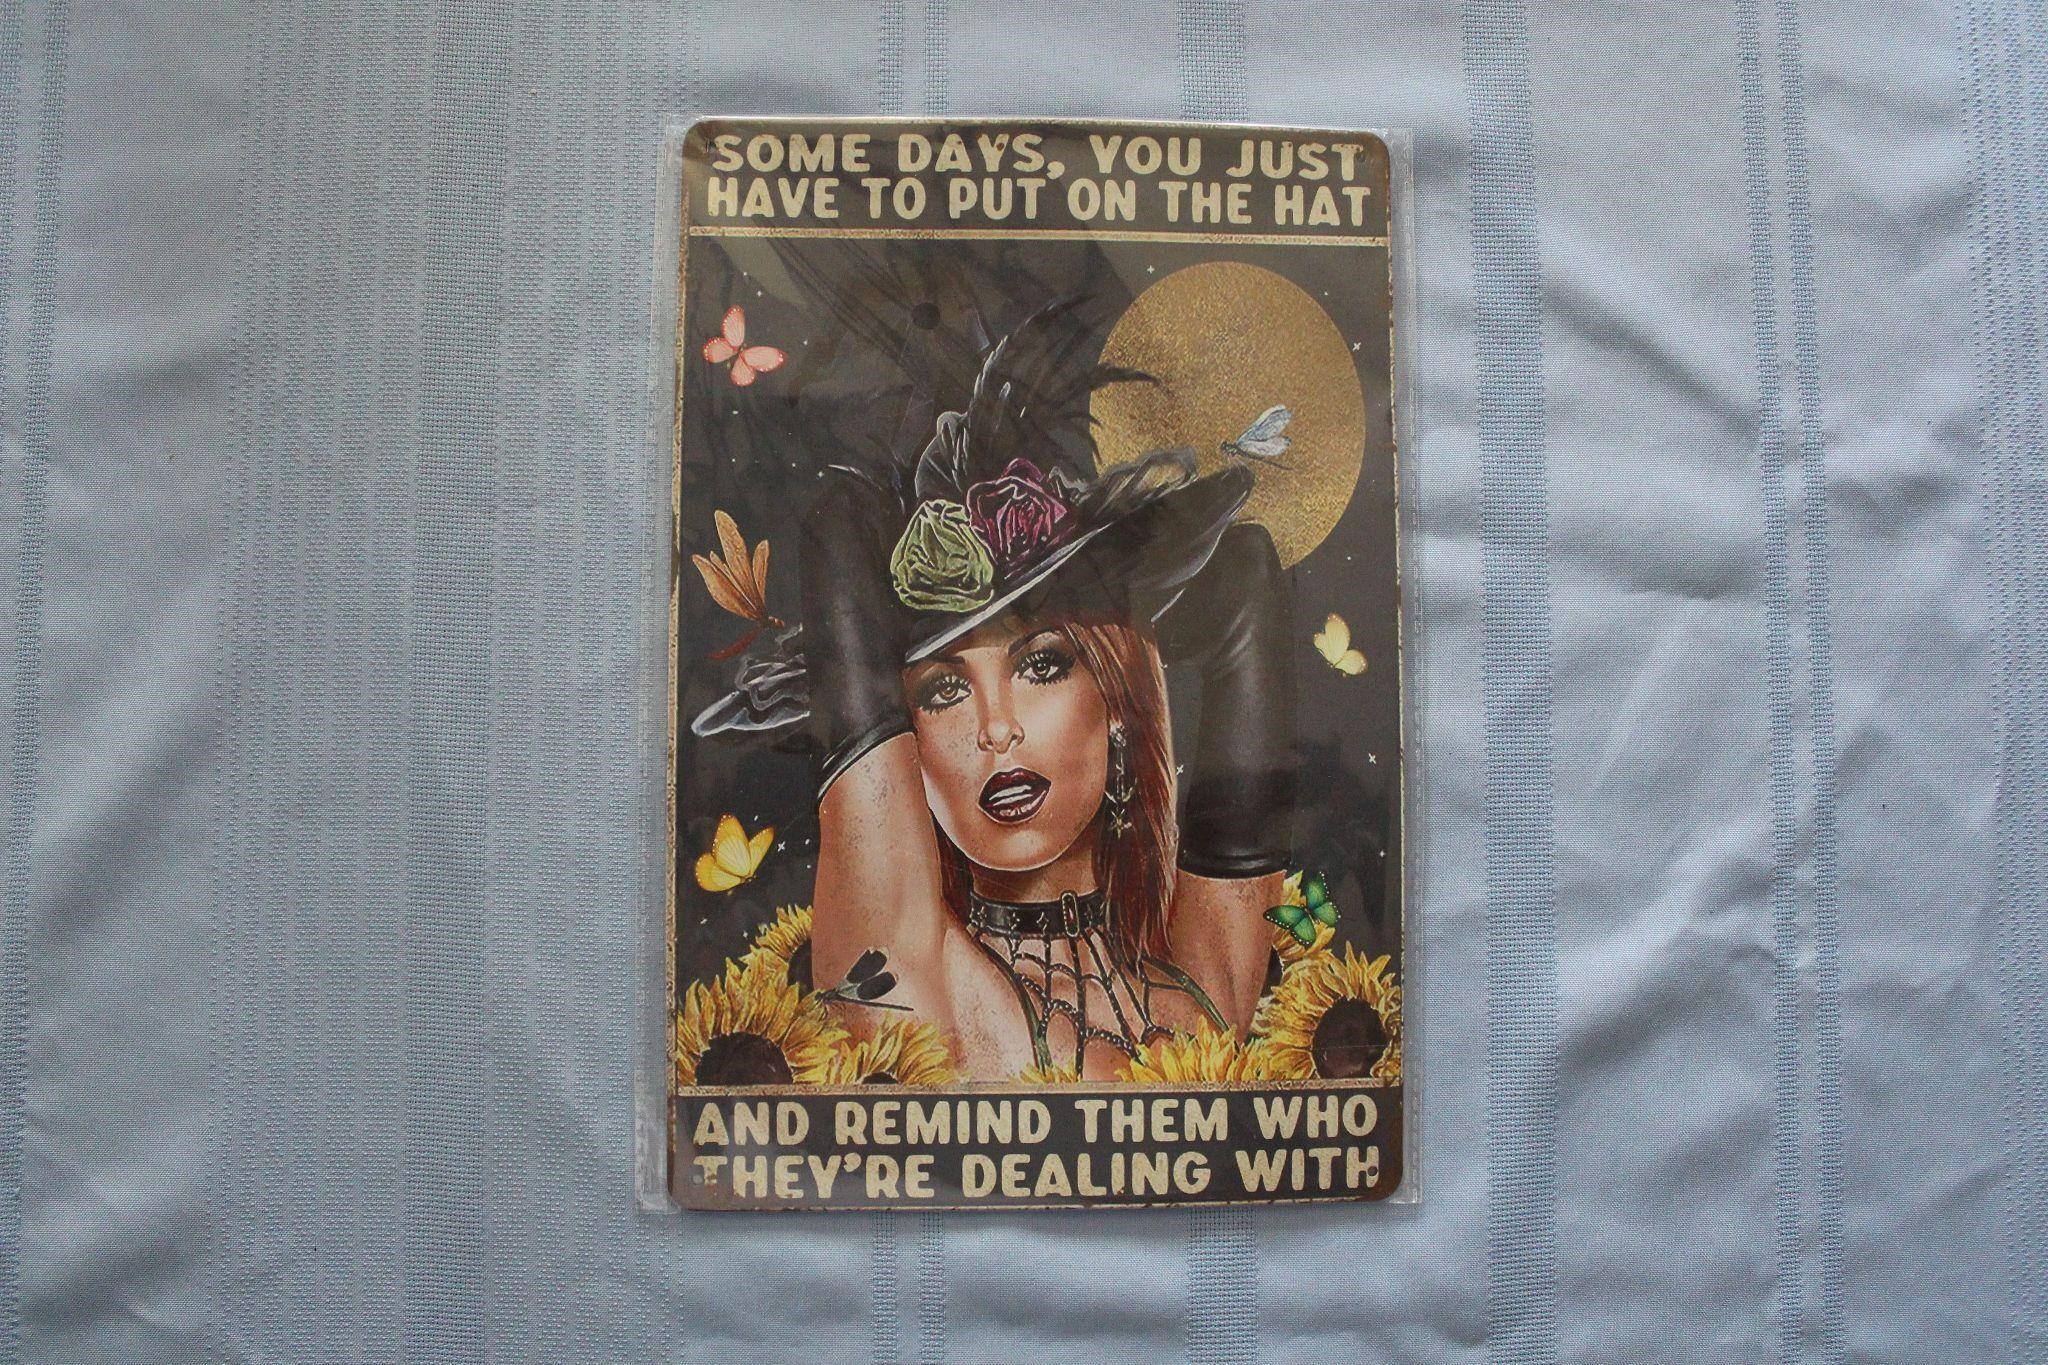 Retro Tin Sign: Some Days...Put on the Hat